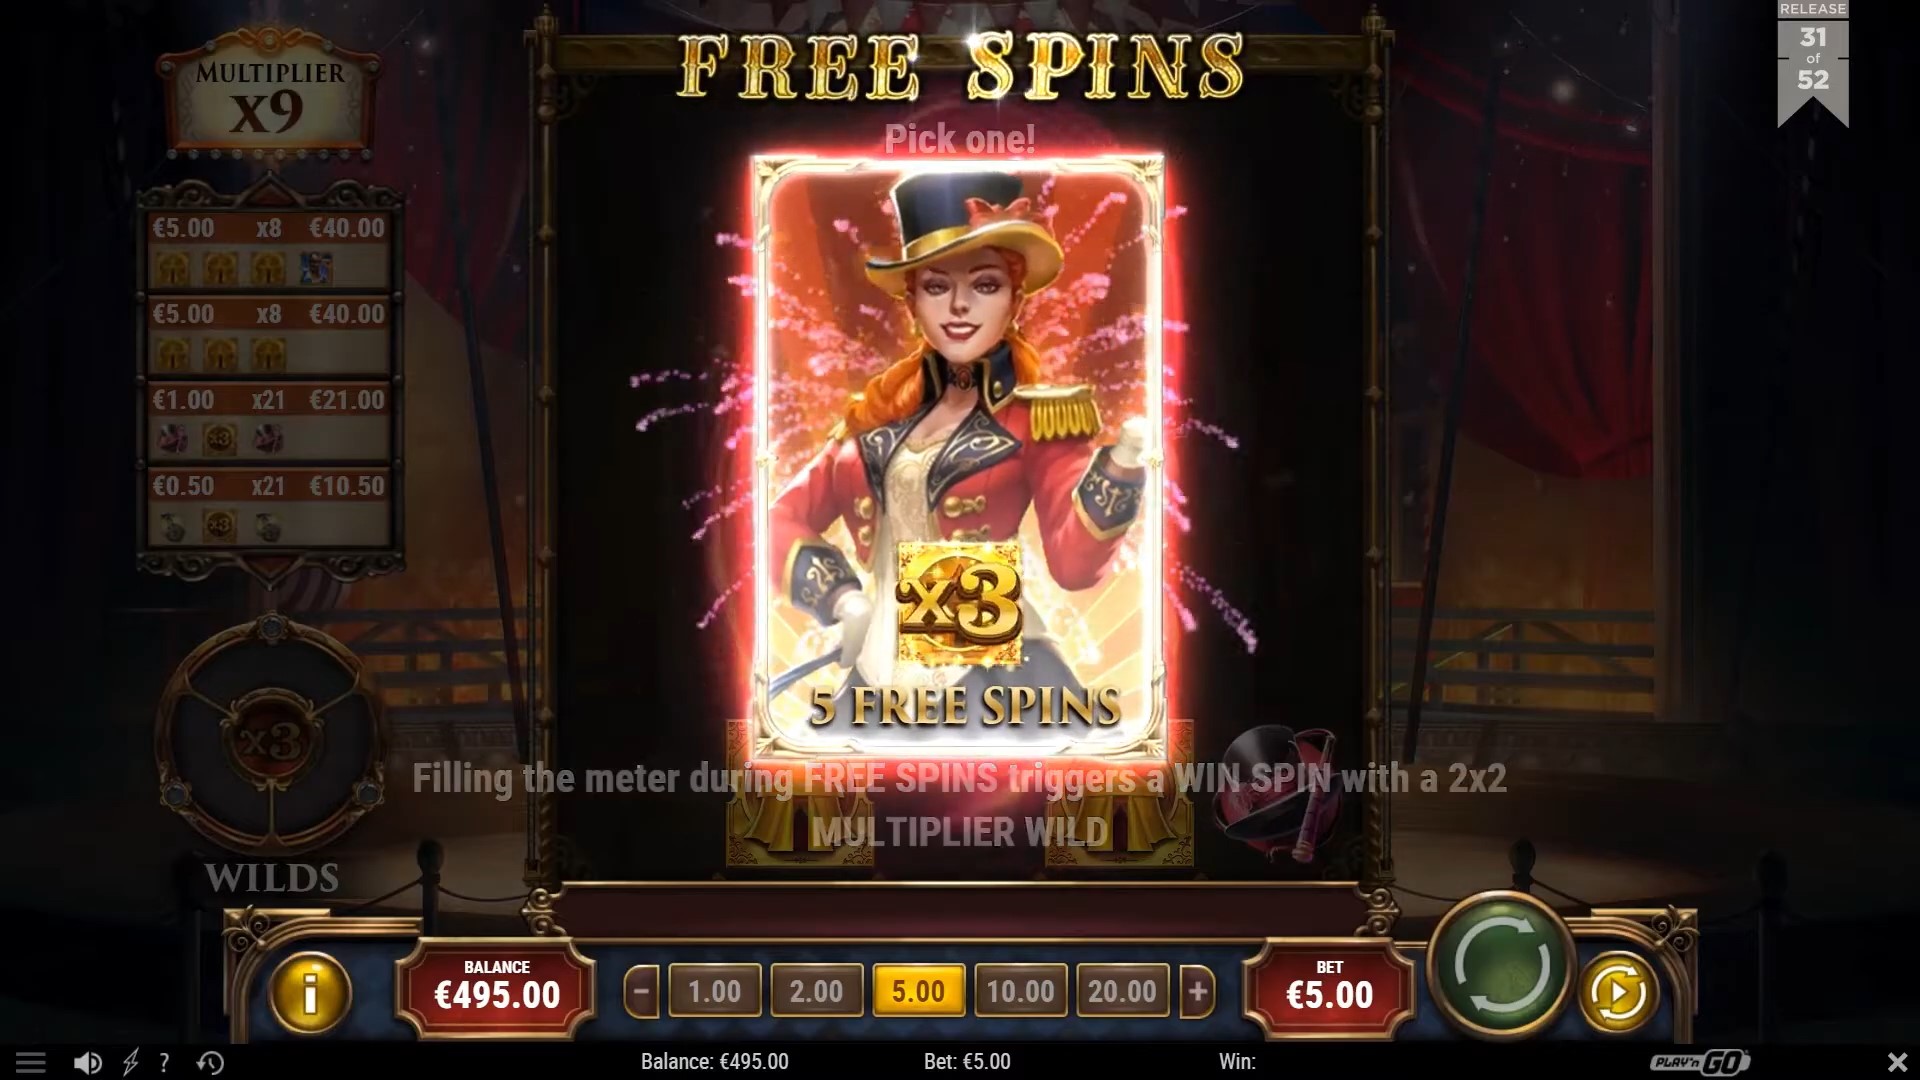 Golden Ticket 2 free spin option Playn GO